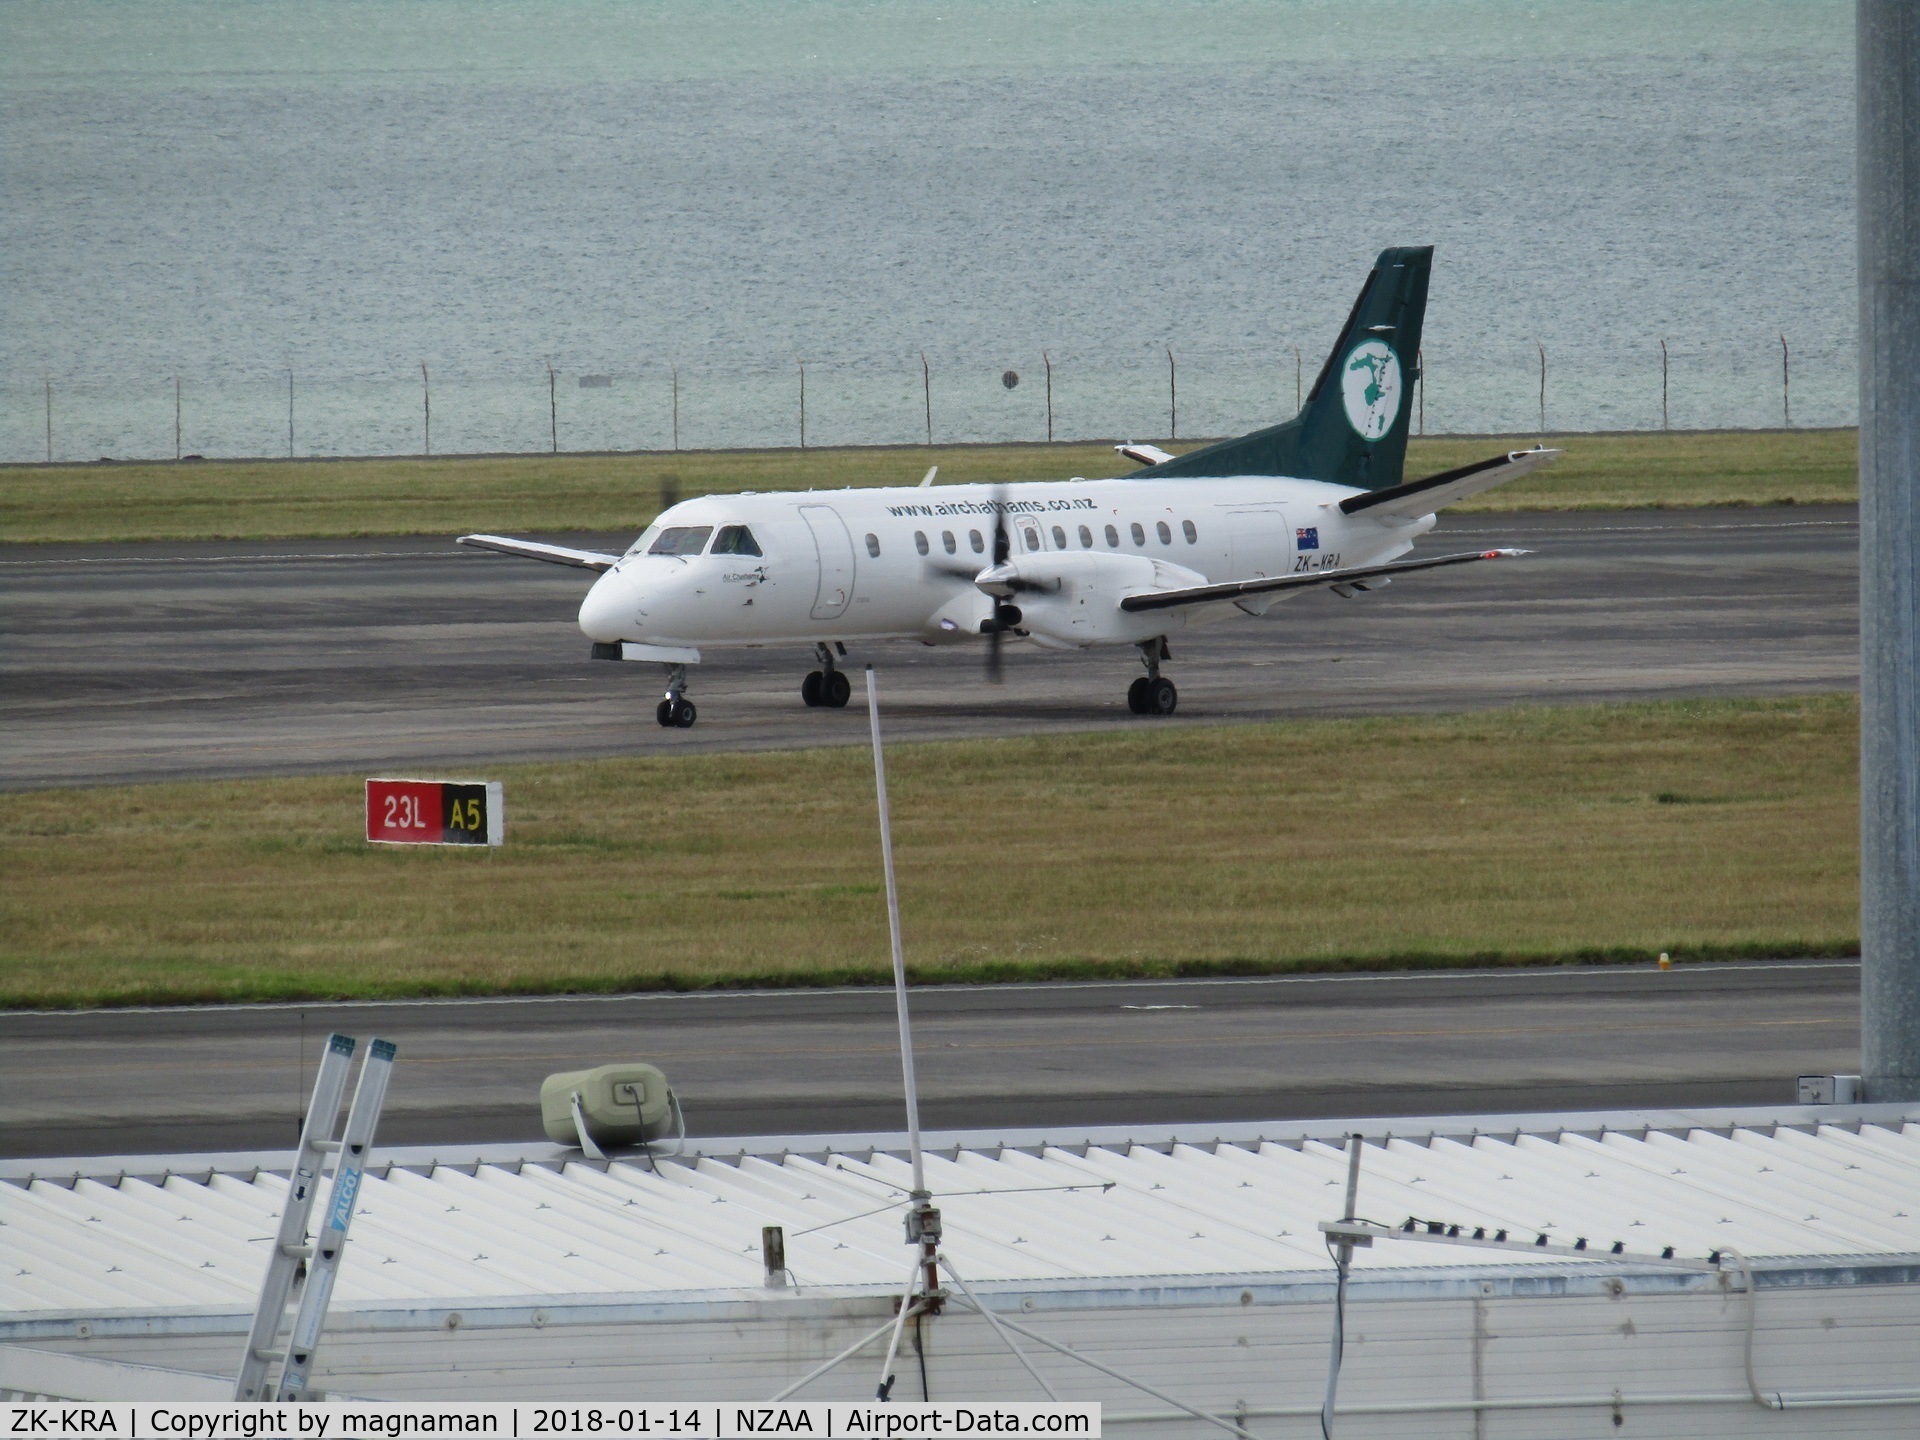 ZK-KRA, 1986 Saab SF340A C/N 340A-065, just landed - now one of 3 saabs with air chathams